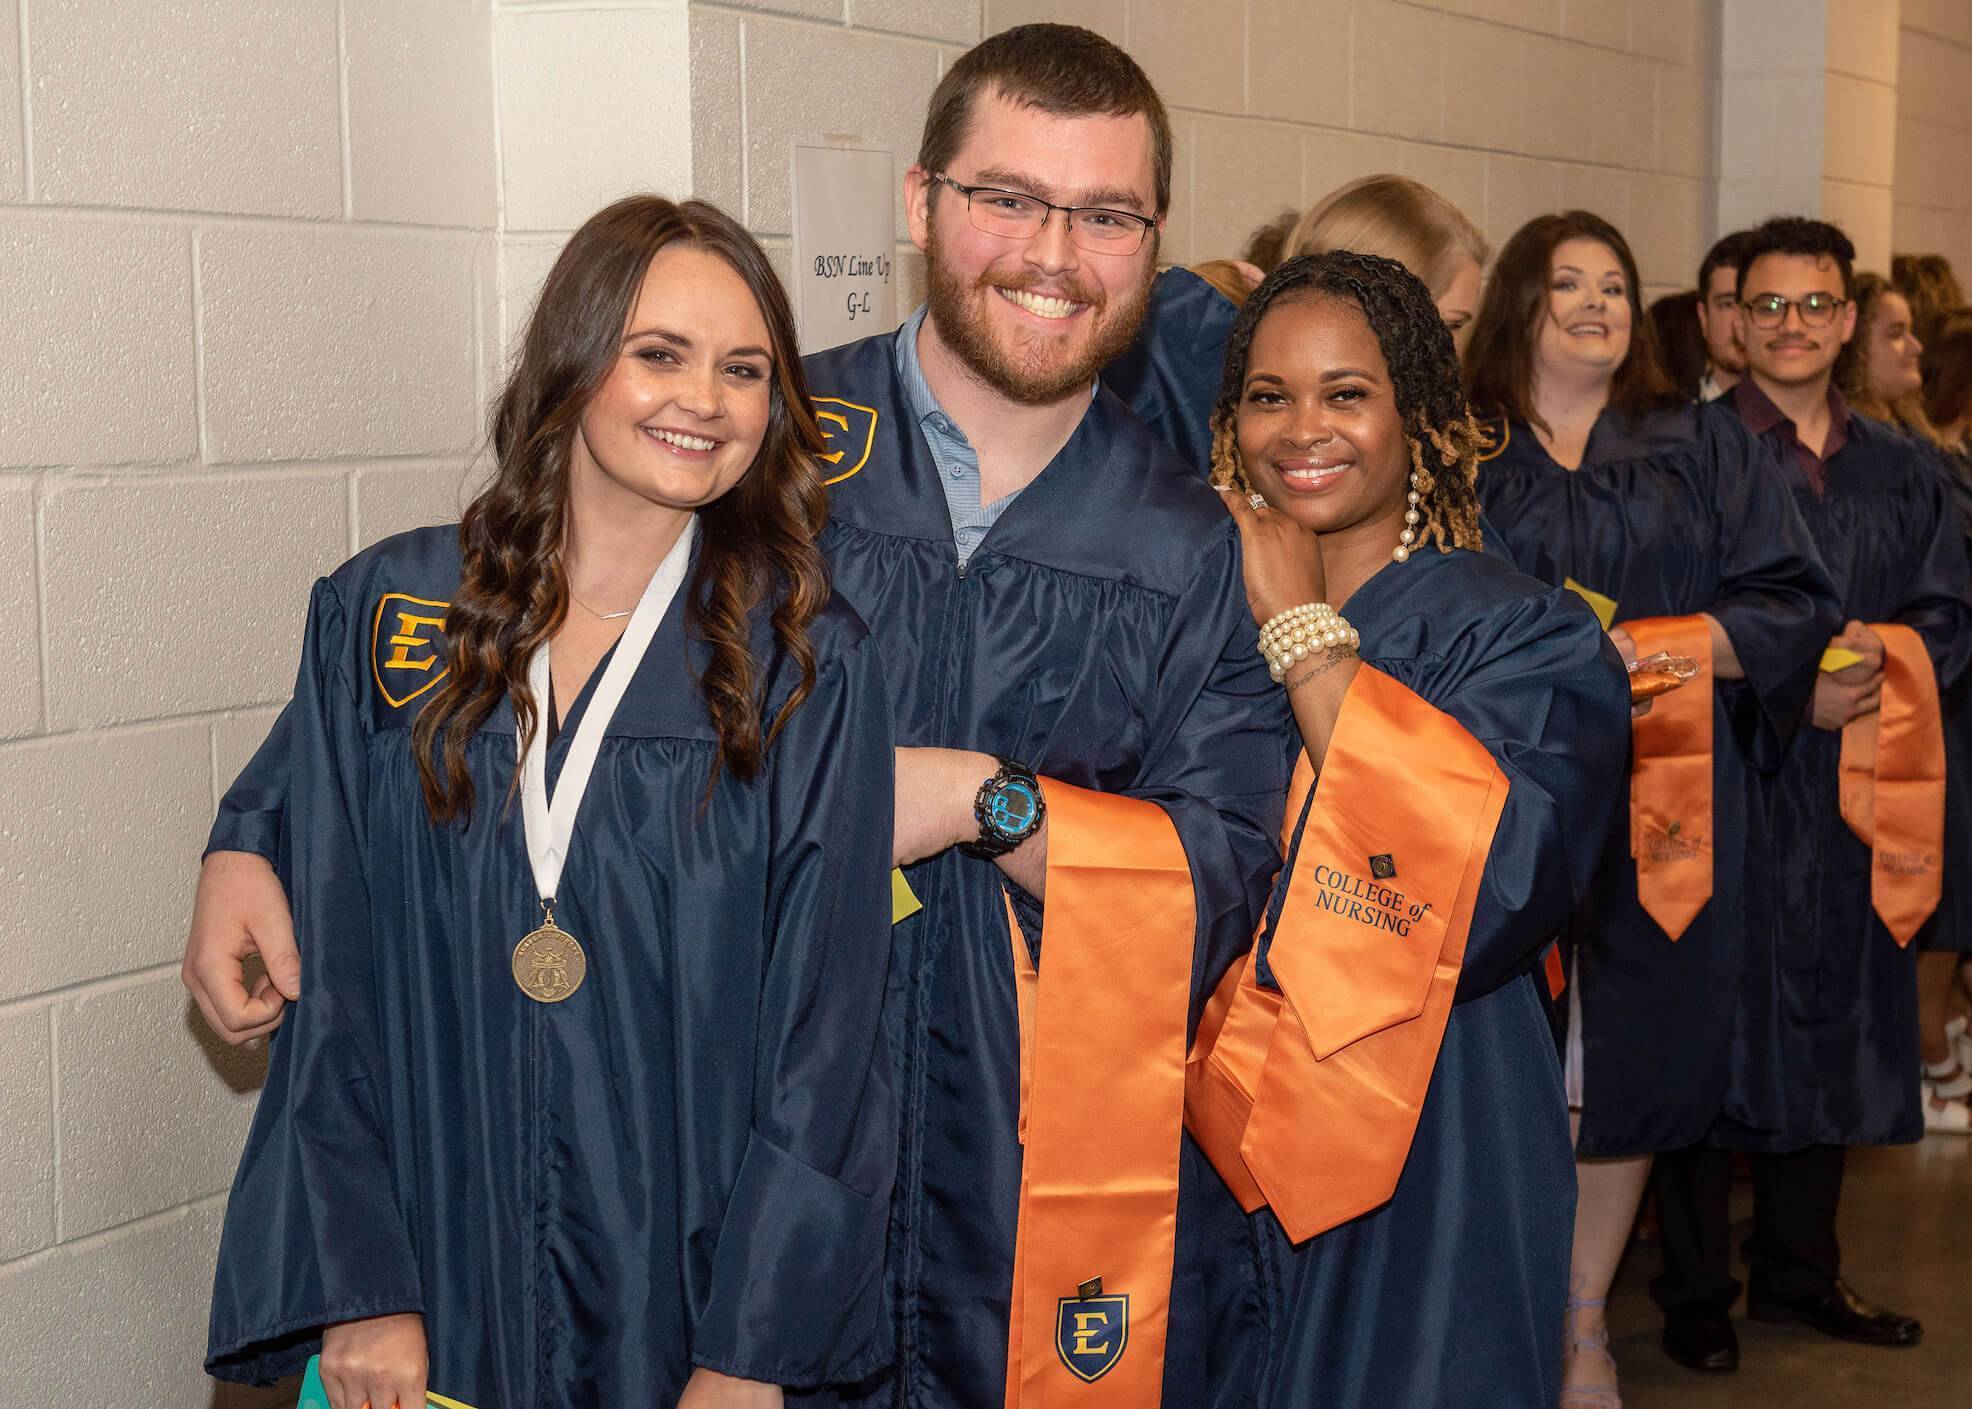 A line of students at graduation. Two women and a man smile at the camera.